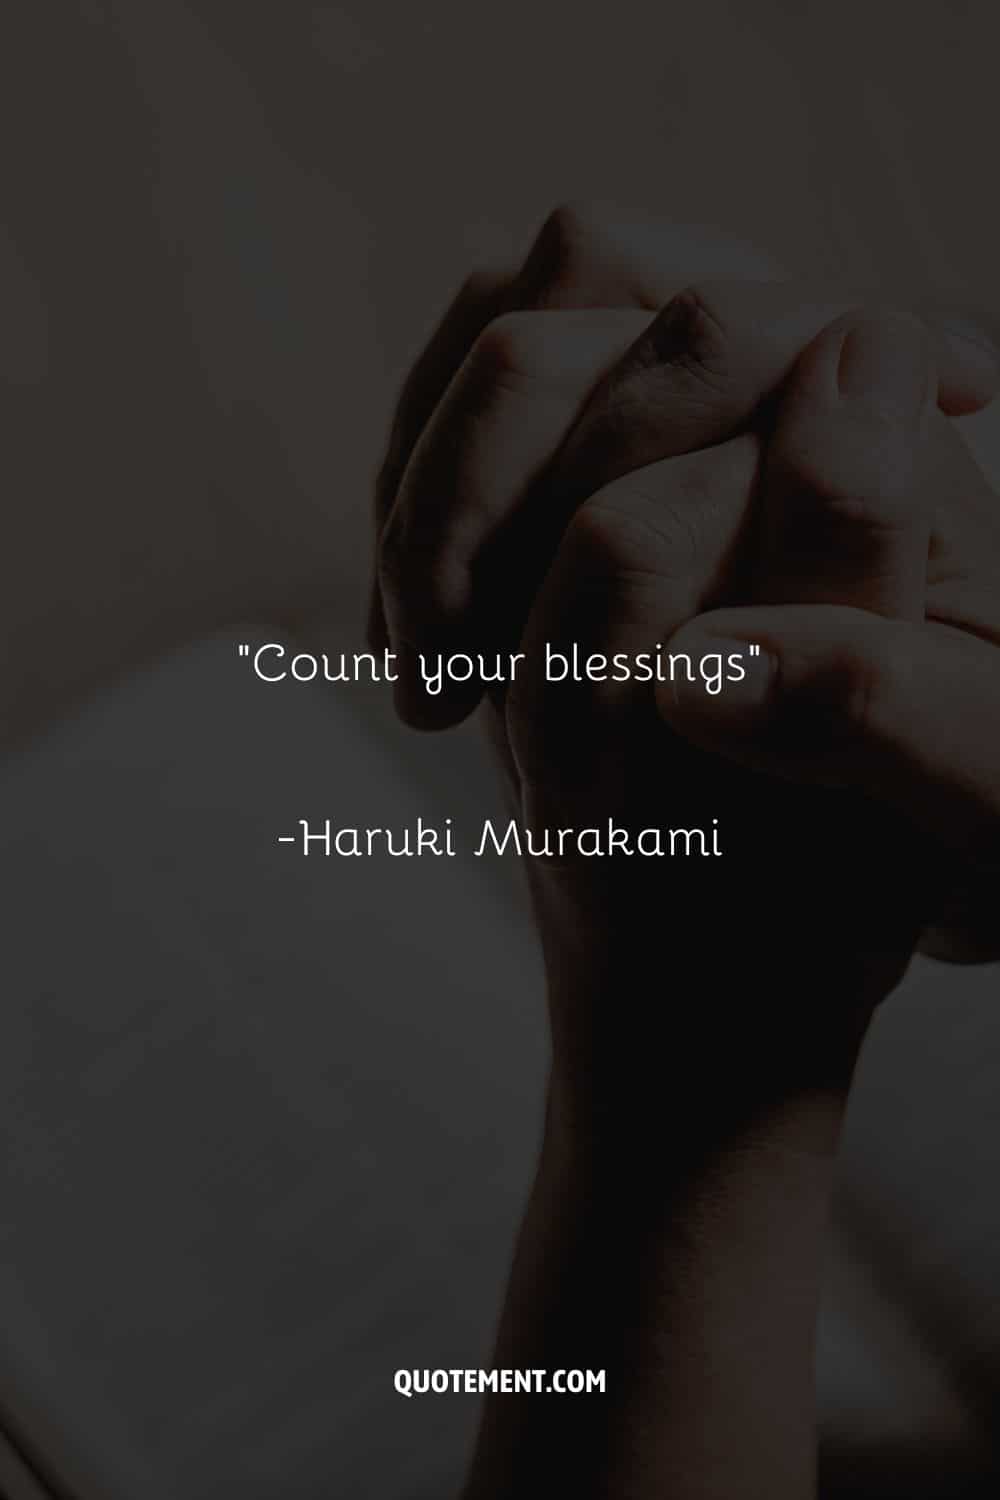 “Count your blessings”